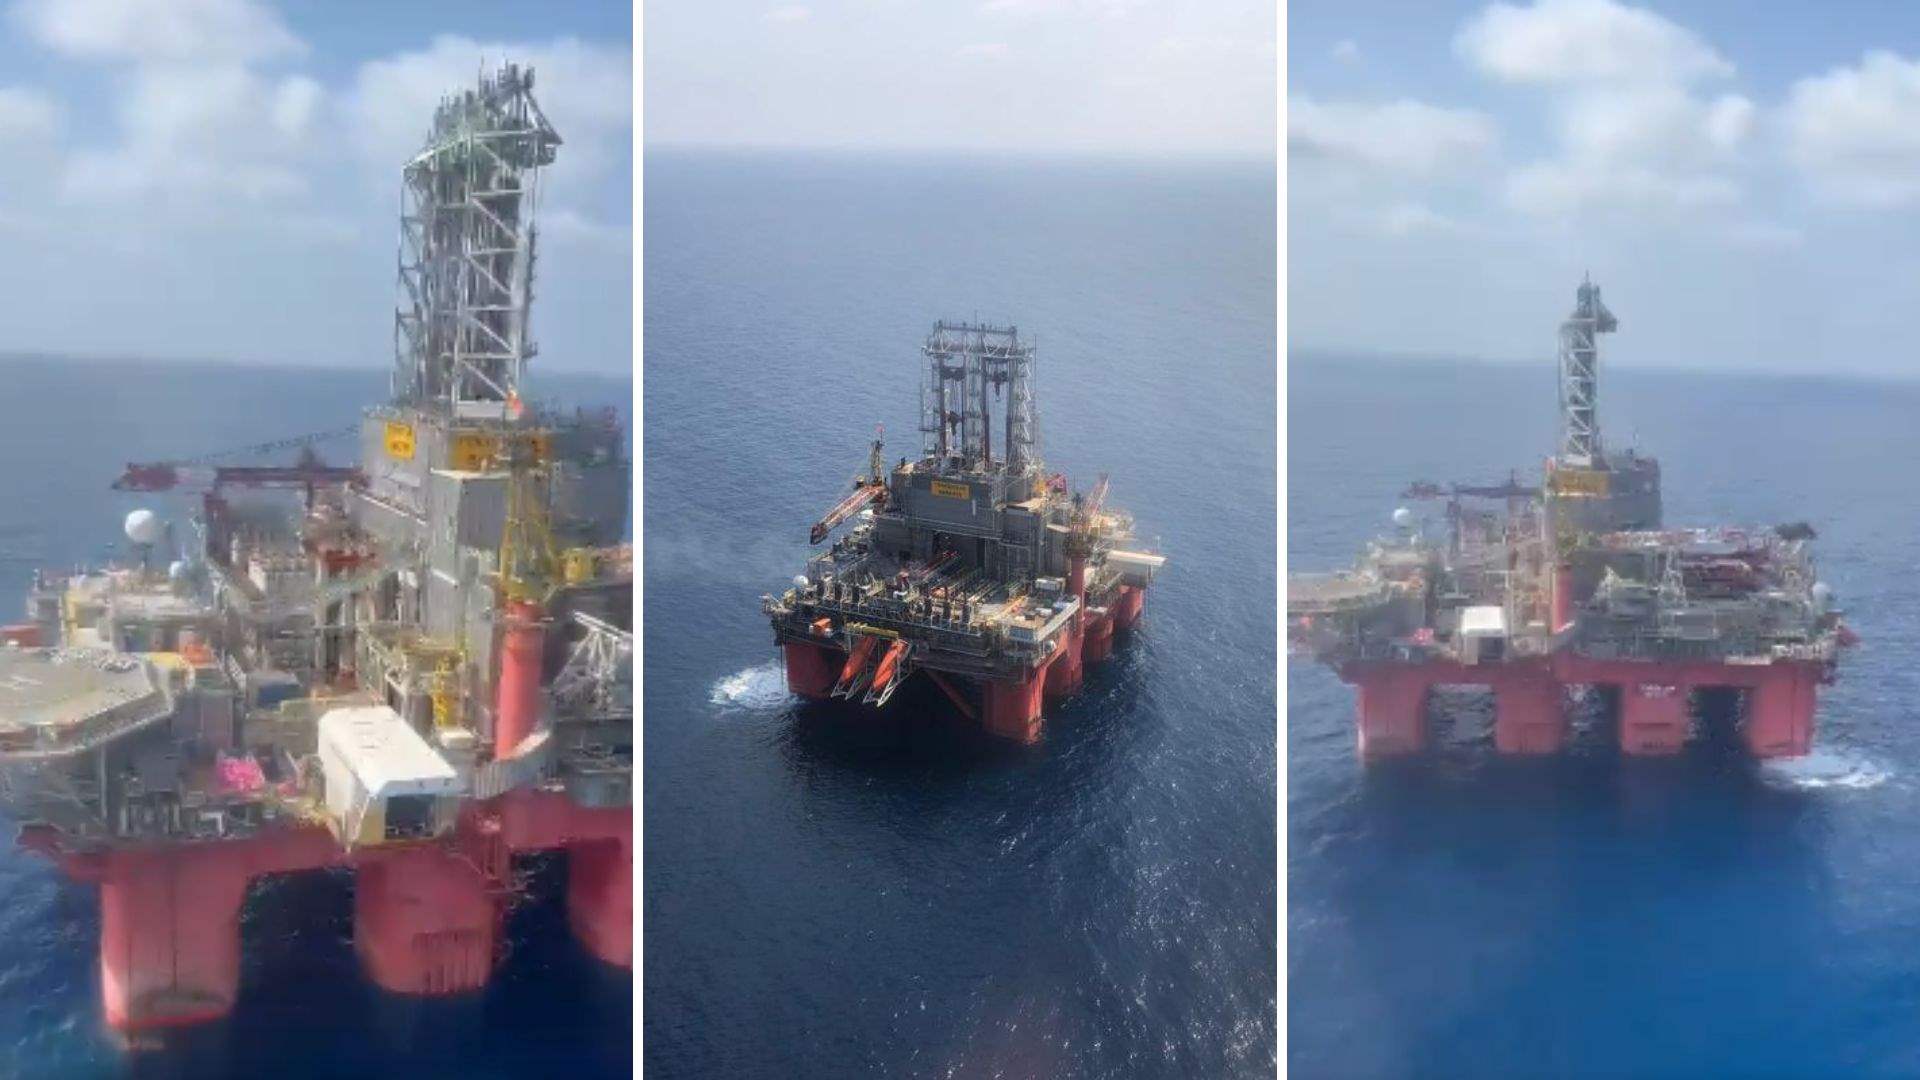 In videos: Public Works Minister shares live footage of Block 9&#39;s oil and gas drilling rig